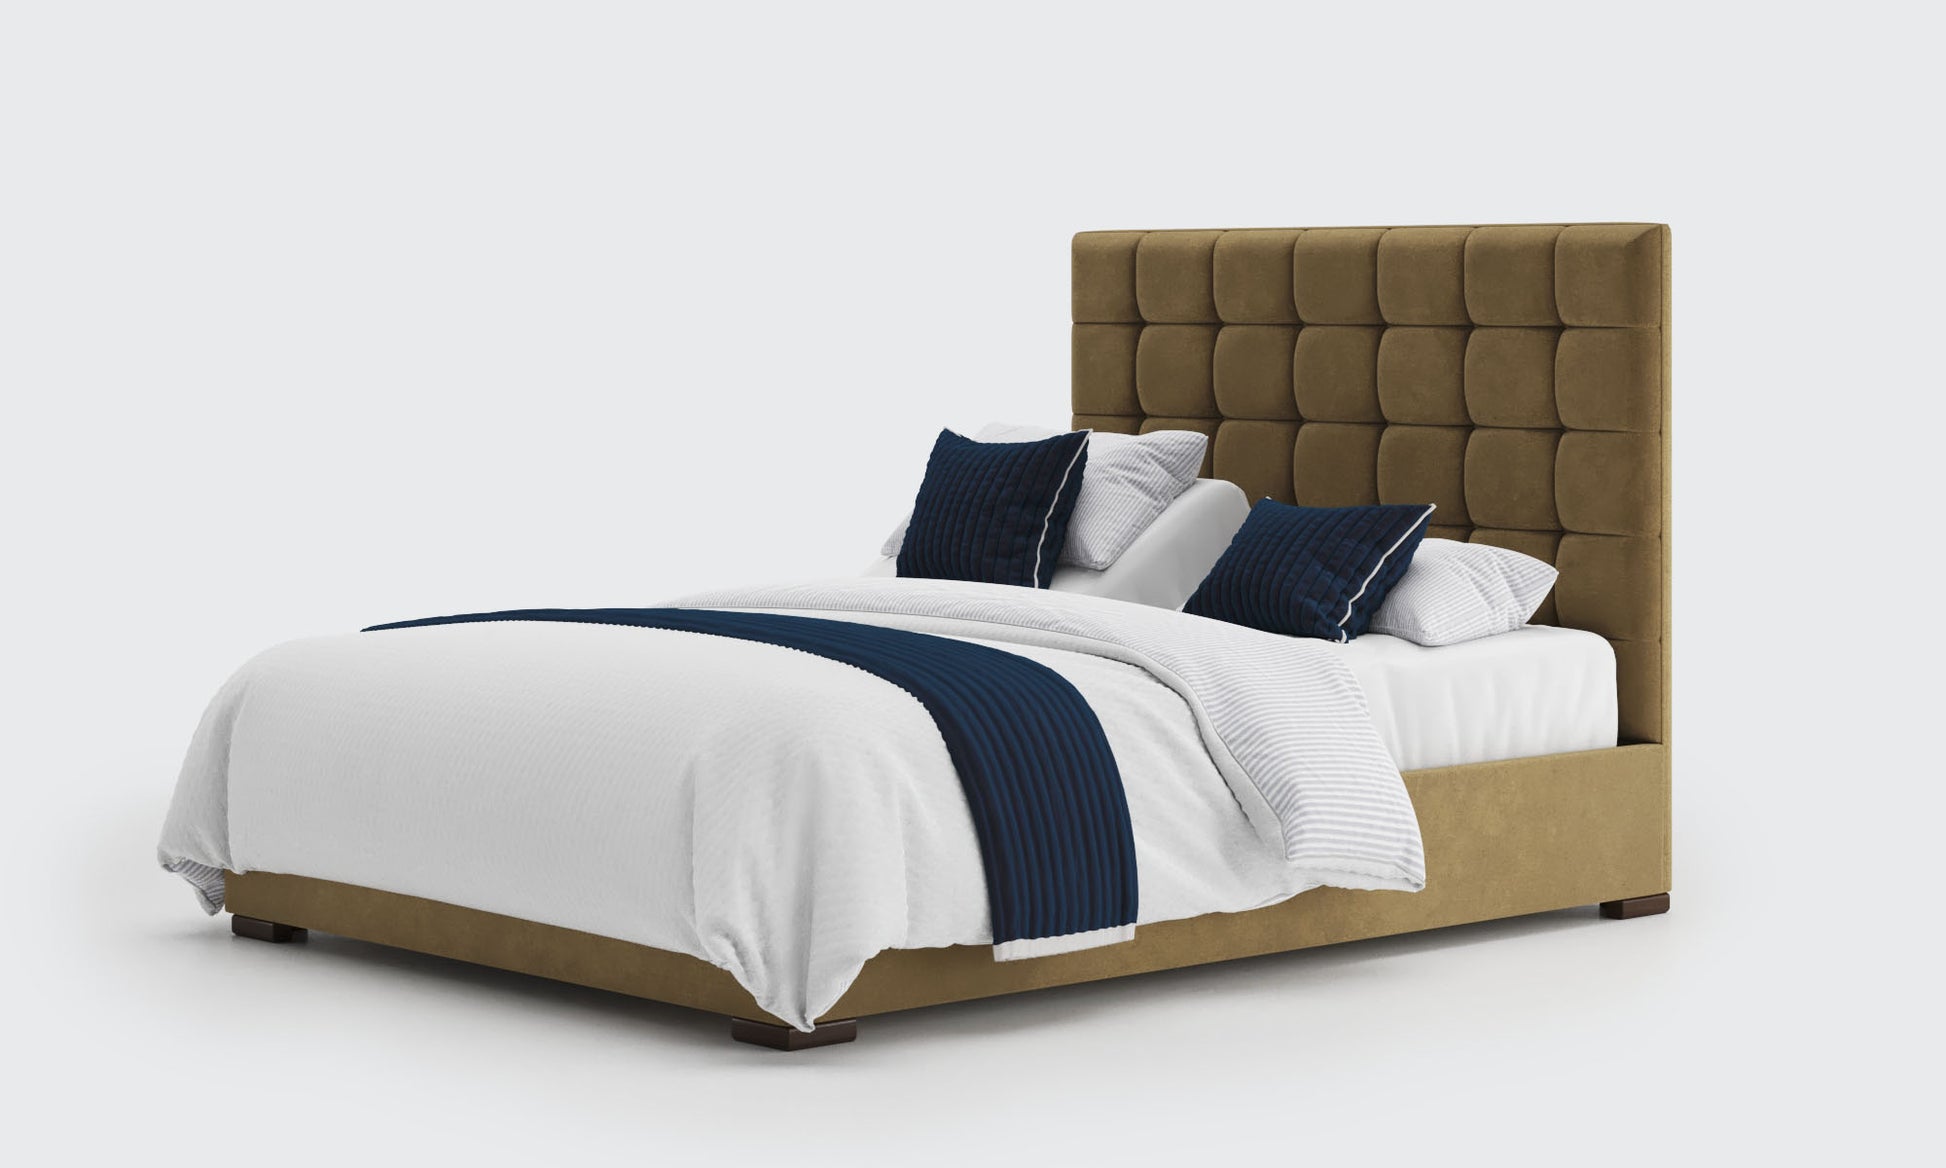 stratton 5ft king dual bed and mattresses in the biscuit velvet material